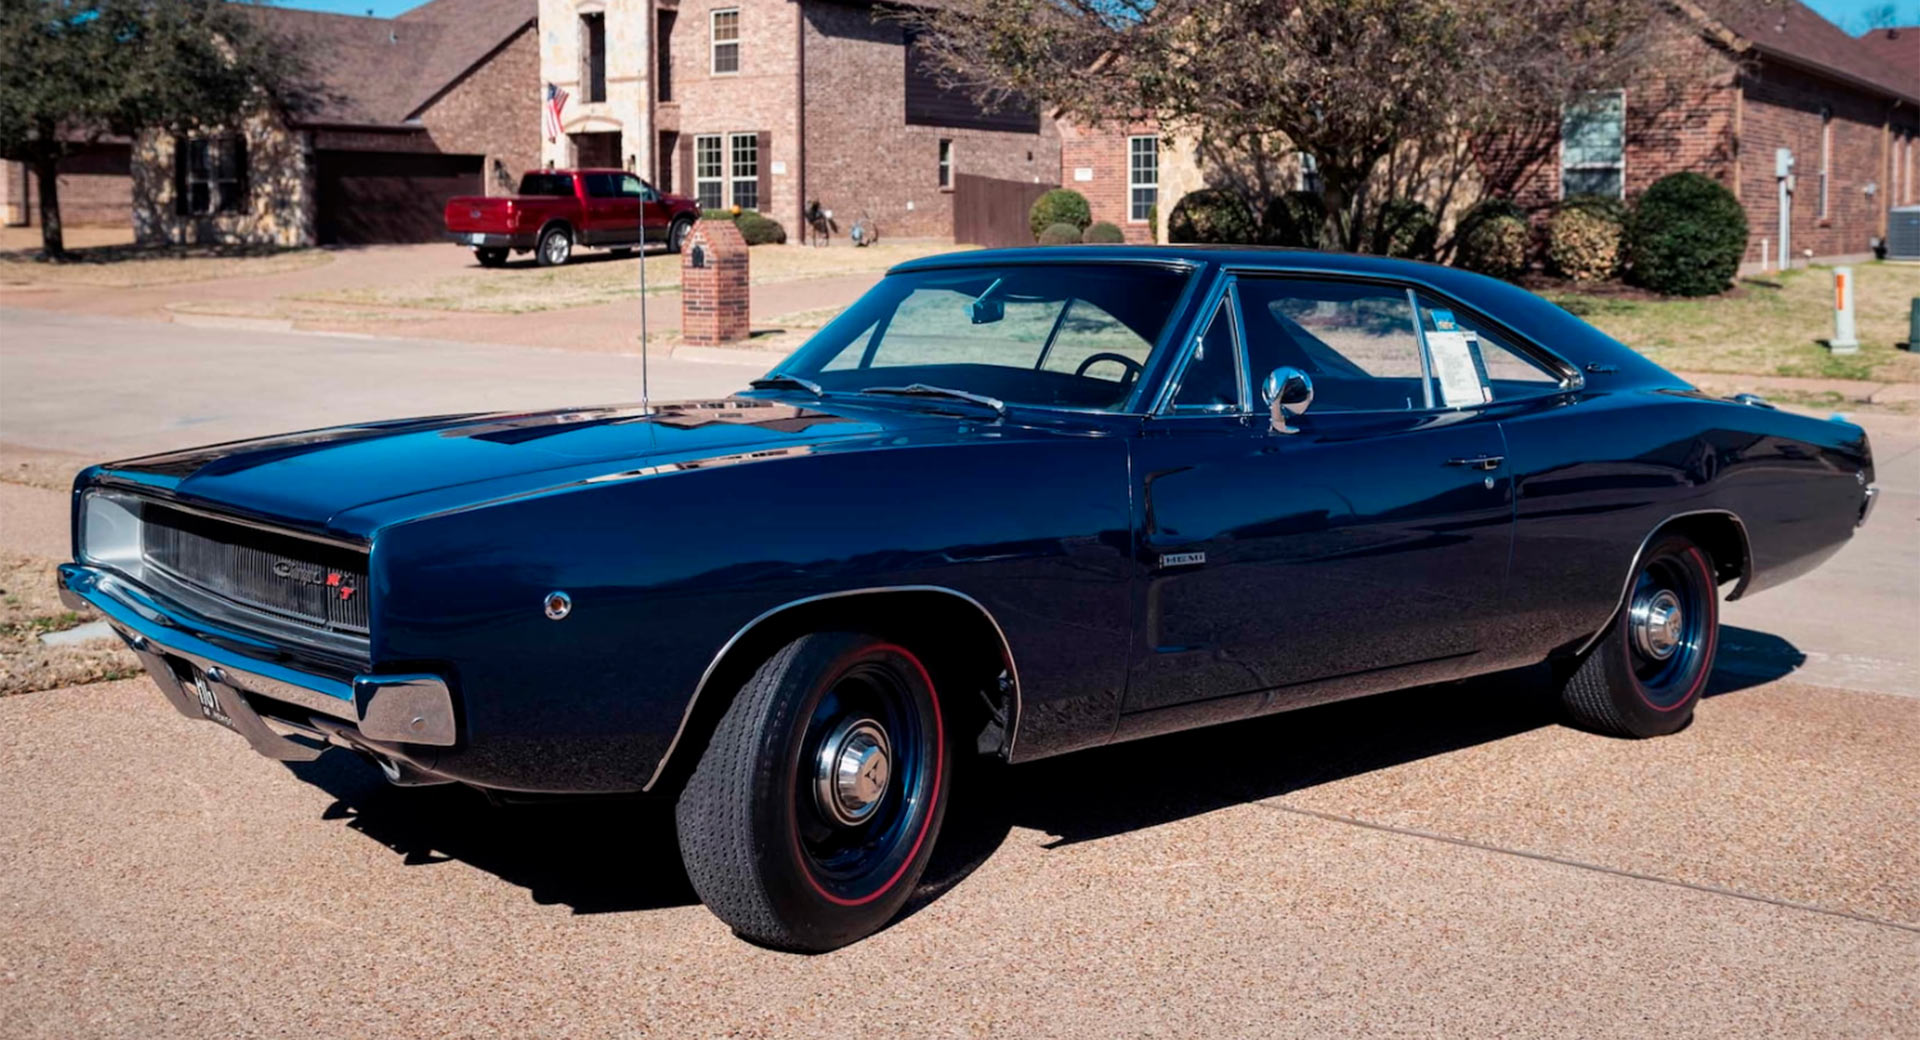 1968 Dodge Charger Hemi R/T Is A Fine Piece Of Old American Muscle |  Carscoops